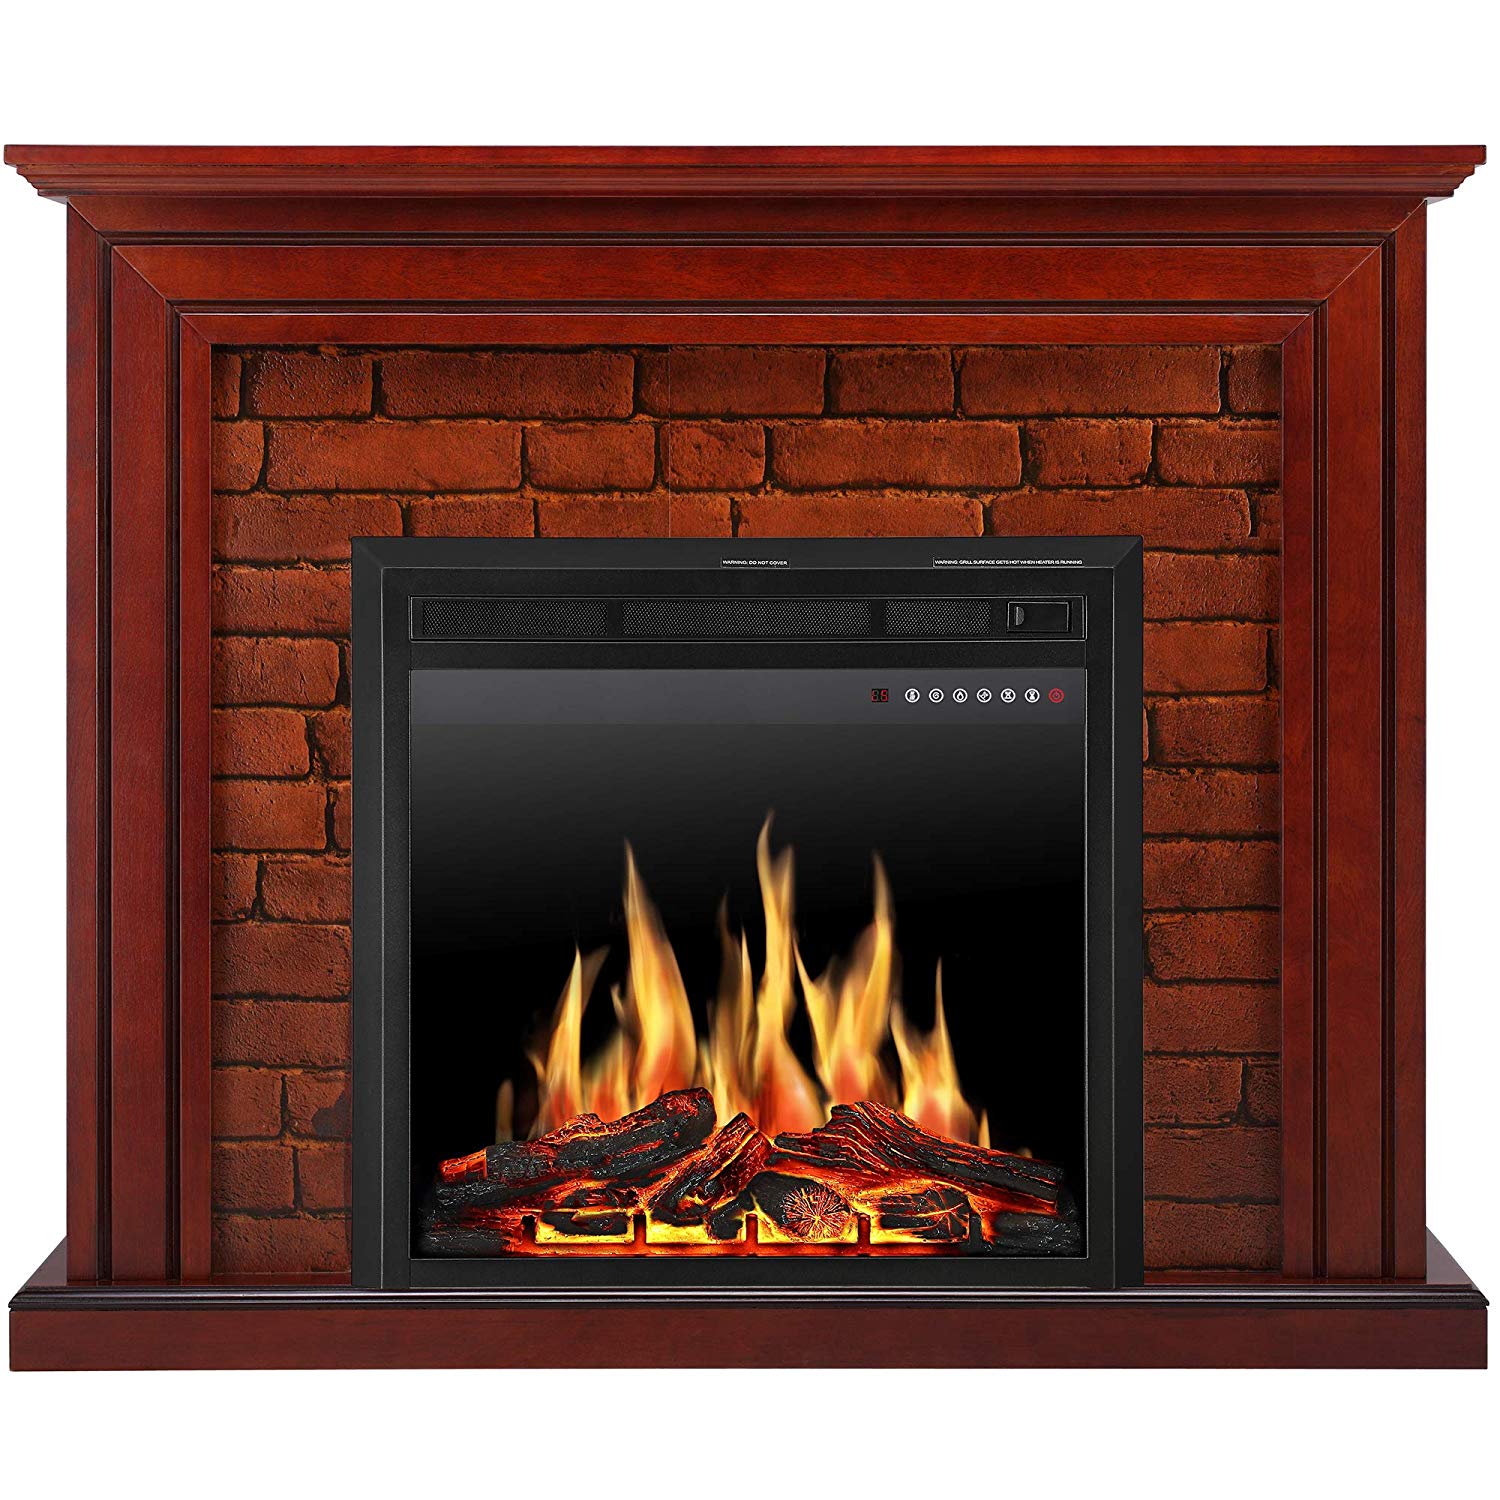 Fireplace Tv Stand for 55 Inch Tv Luxury Jamfly Electric Fireplace Mantel Package Traditional Brick Wall Design Heater with Remote Control and Led touch Screen Home Accent Furnishings